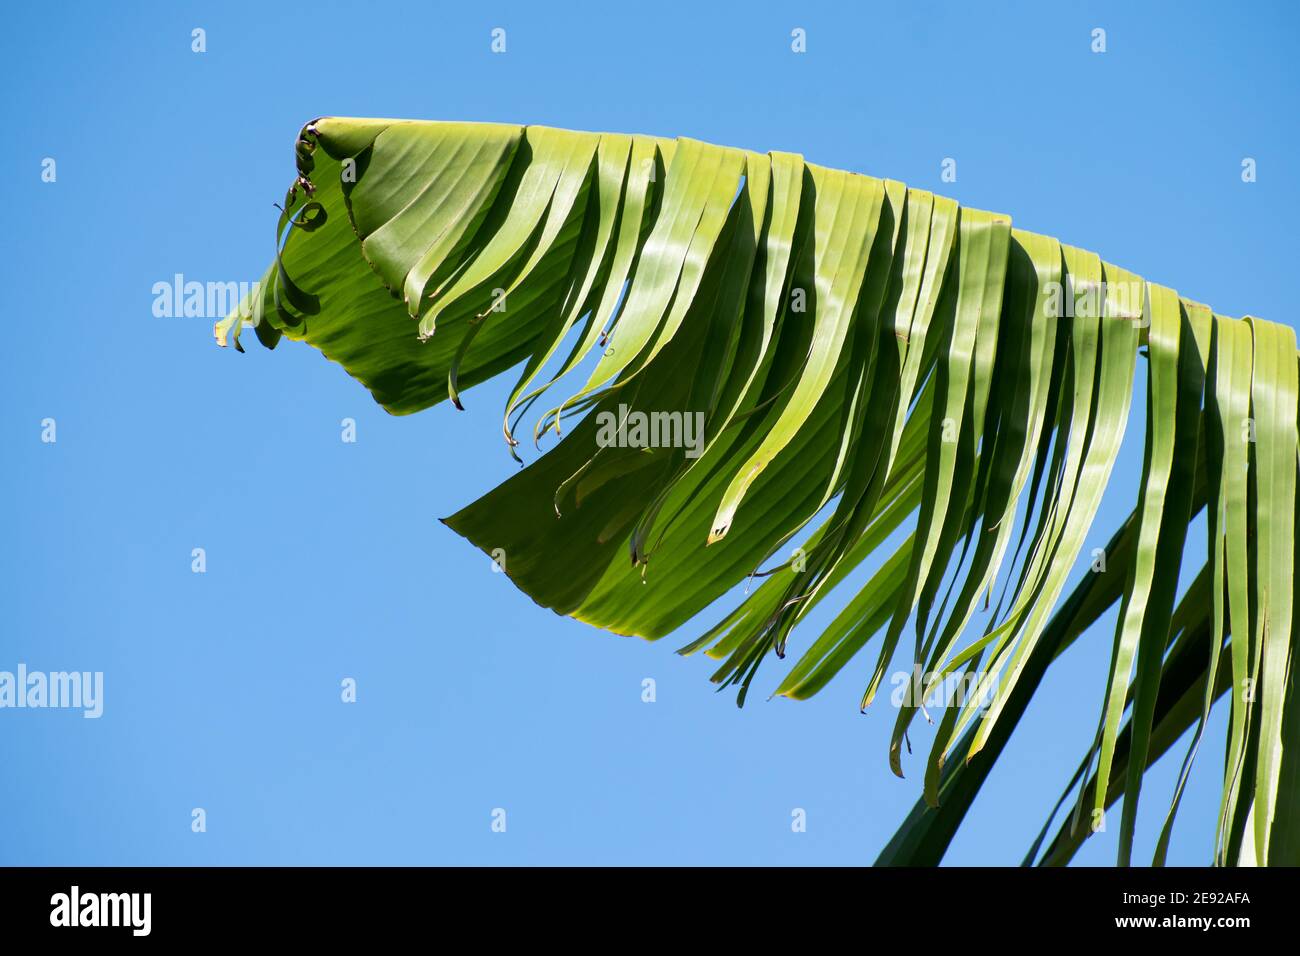 Partial side view of a shredded, green banana leaf as it blows in the wind, isolated against the bright blue sky. Stock Photo